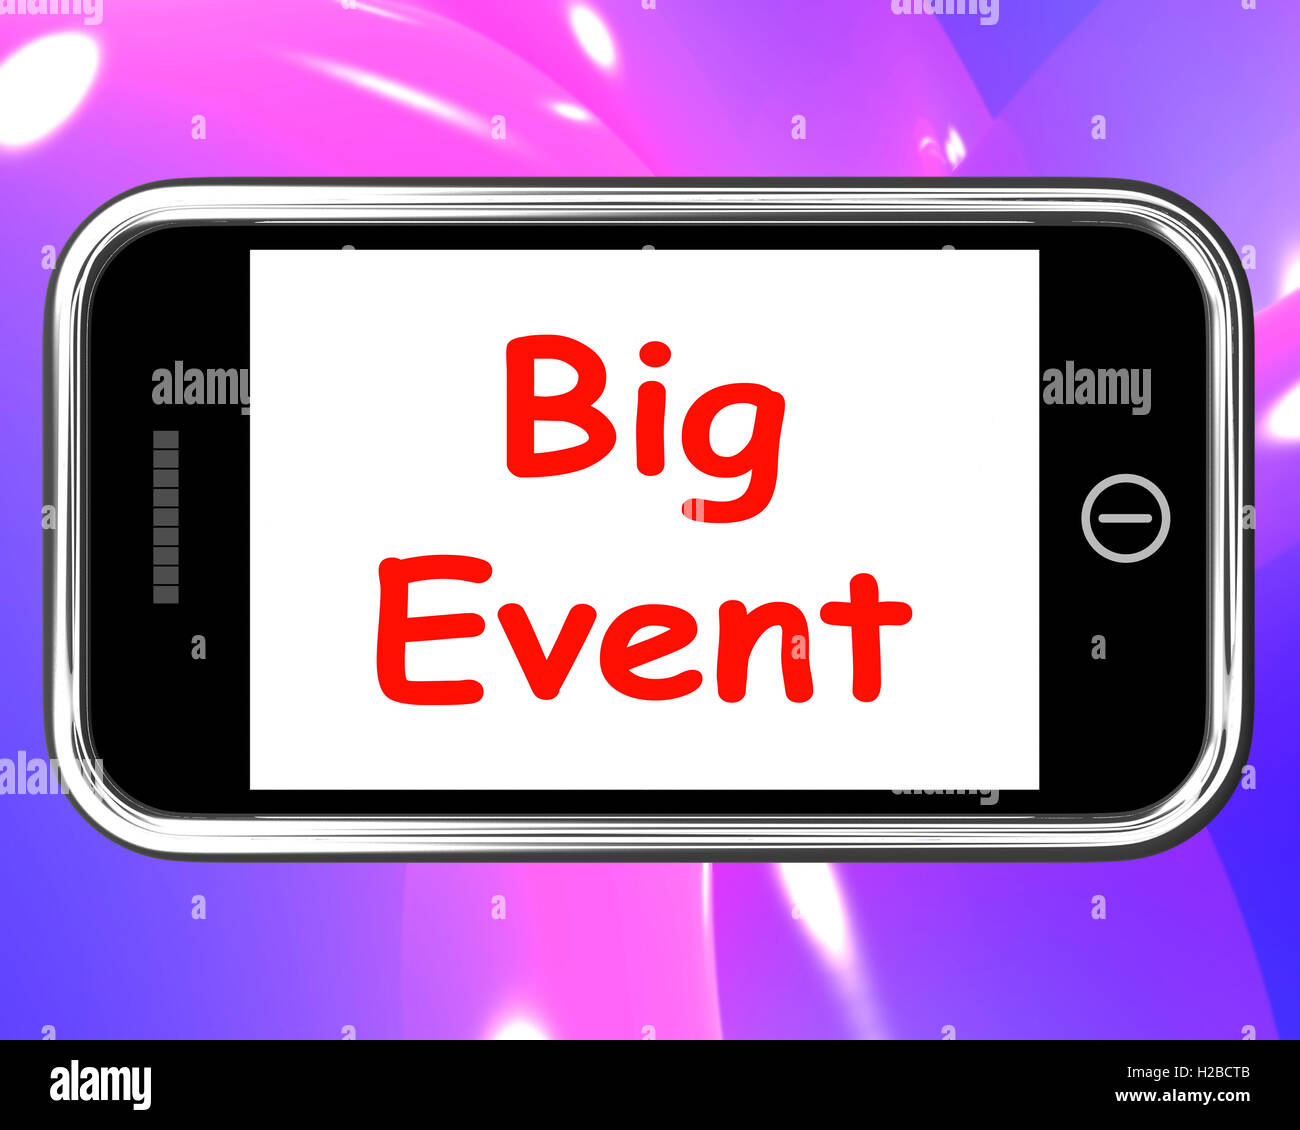 Big Event On Phone Shows Celebration Occasion Festival And Perfo Stock Photo